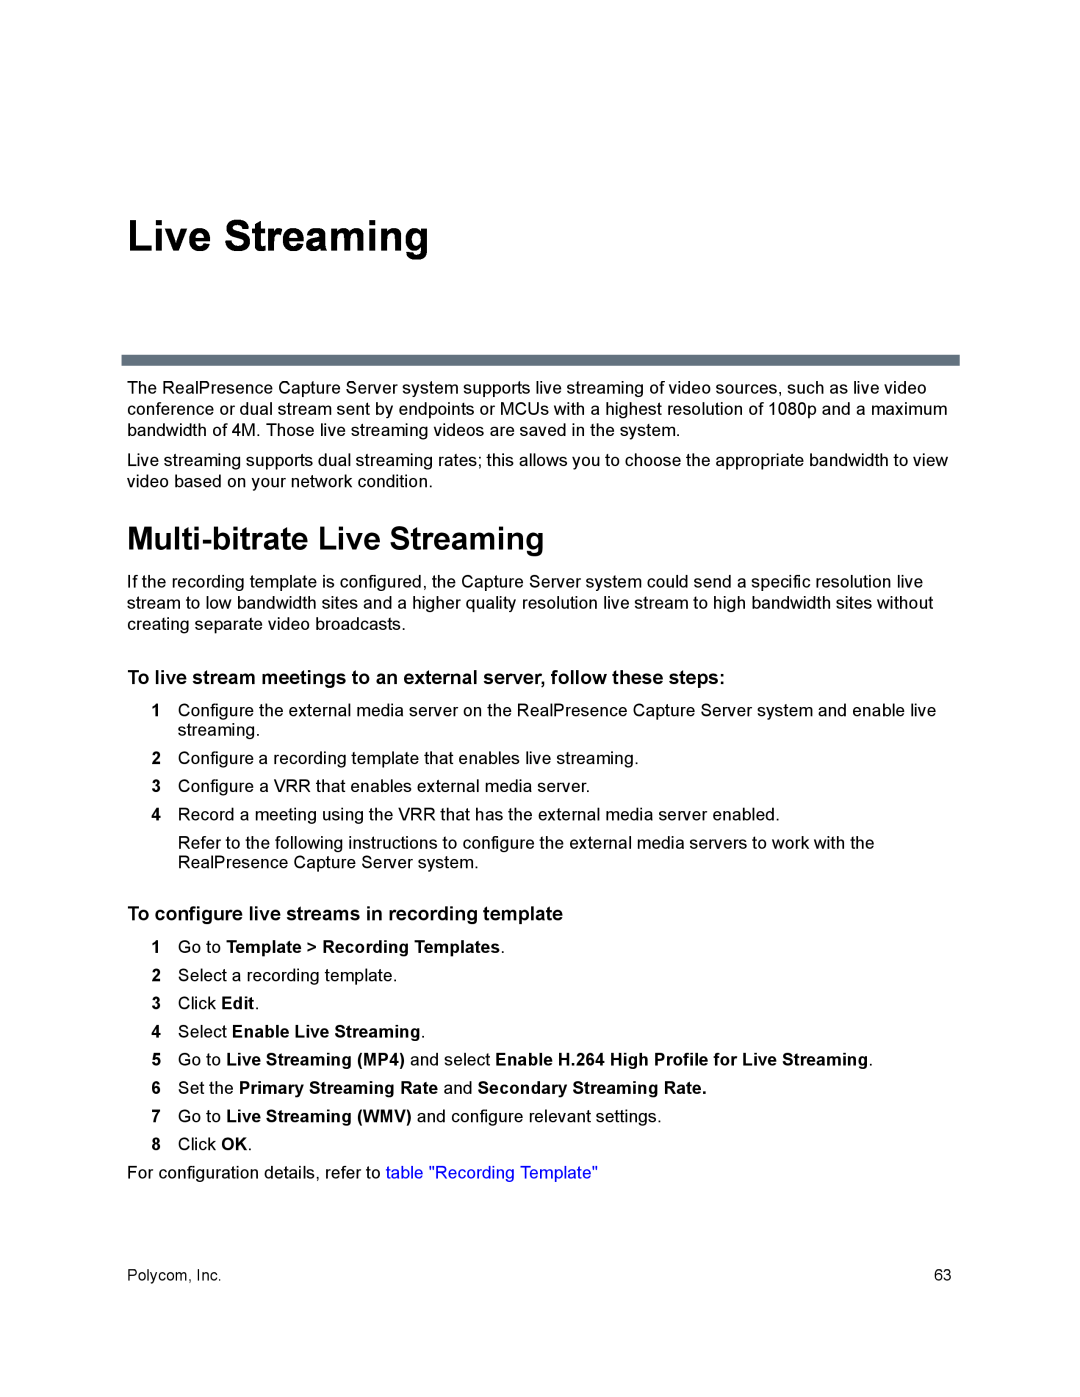 Polycom 40/0 manual Multi-bitrate Live Streaming, To live stream meetings to an external server, follow these steps 